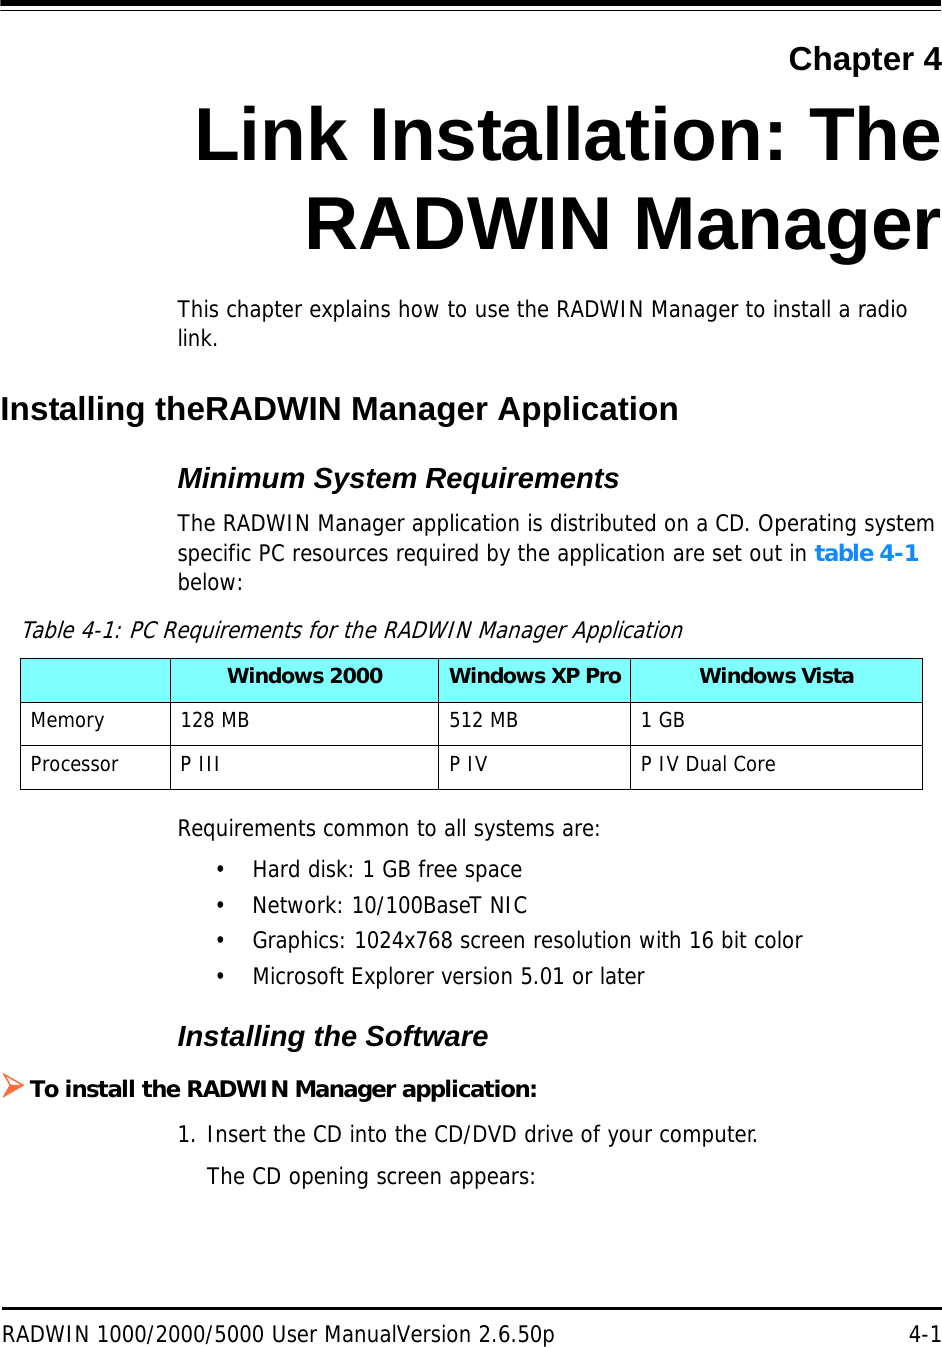 RADWIN 1000/2000/5000 User ManualVersion 2.6.50p 4-1Chapter 4Link Installation: TheRADWIN ManagerThis chapter explains how to use the RADWIN Manager to install a radio link.Installing theRADWIN Manager ApplicationMinimum System RequirementsThe RADWIN Manager application is distributed on a CD. Operating system specific PC resources required by the application are set out in table 4-1 below:Requirements common to all systems are:• Hard disk: 1 GB free space• Network: 10/100BaseT NIC• Graphics: 1024x768 screen resolution with 16 bit color• Microsoft Explorer version 5.01 or laterInstalling the SoftwareTo install the RADWIN Manager application:1. Insert the CD into the CD/DVD drive of your computer.The CD opening screen appears:Table 4-1: PC Requirements for the RADWIN Manager ApplicationWindows 2000 Windows XP Pro Windows VistaMemory 128 MB 512 MB 1 GBProcessor P III P IV P IV Dual Core